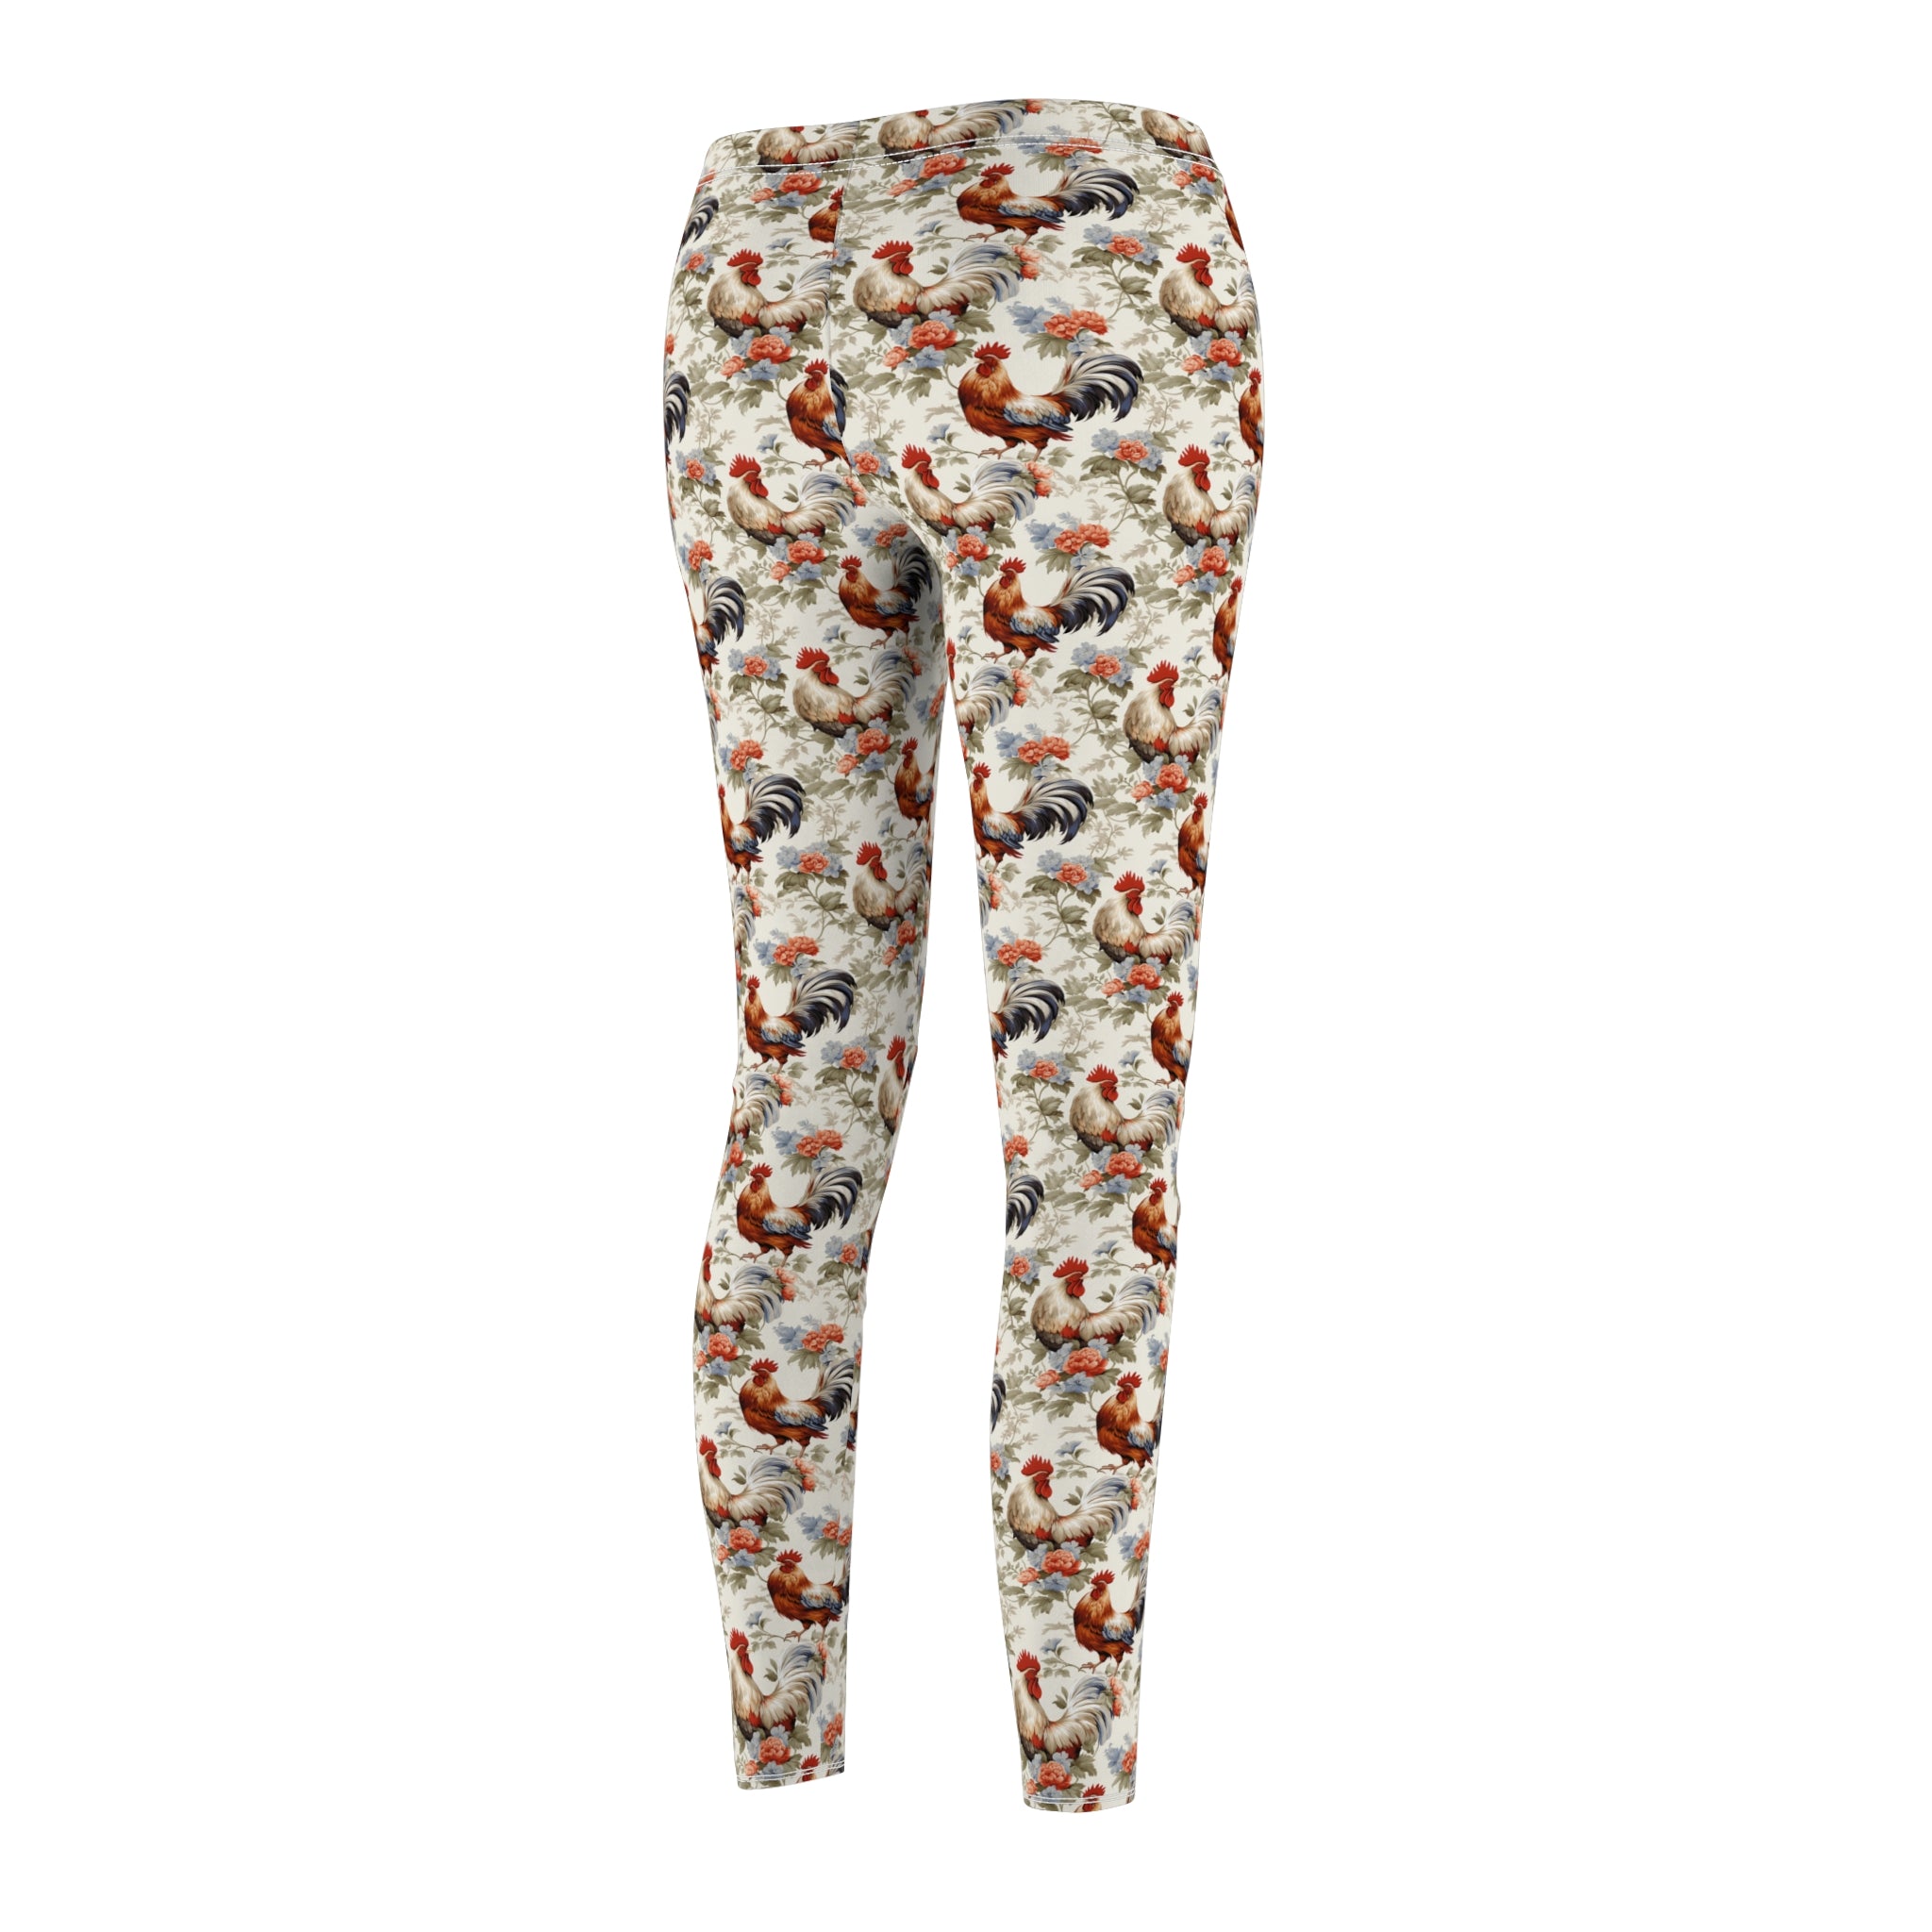 Unique Chicken Farmhouse Gym Leggings for Women – Stand Out in Style!